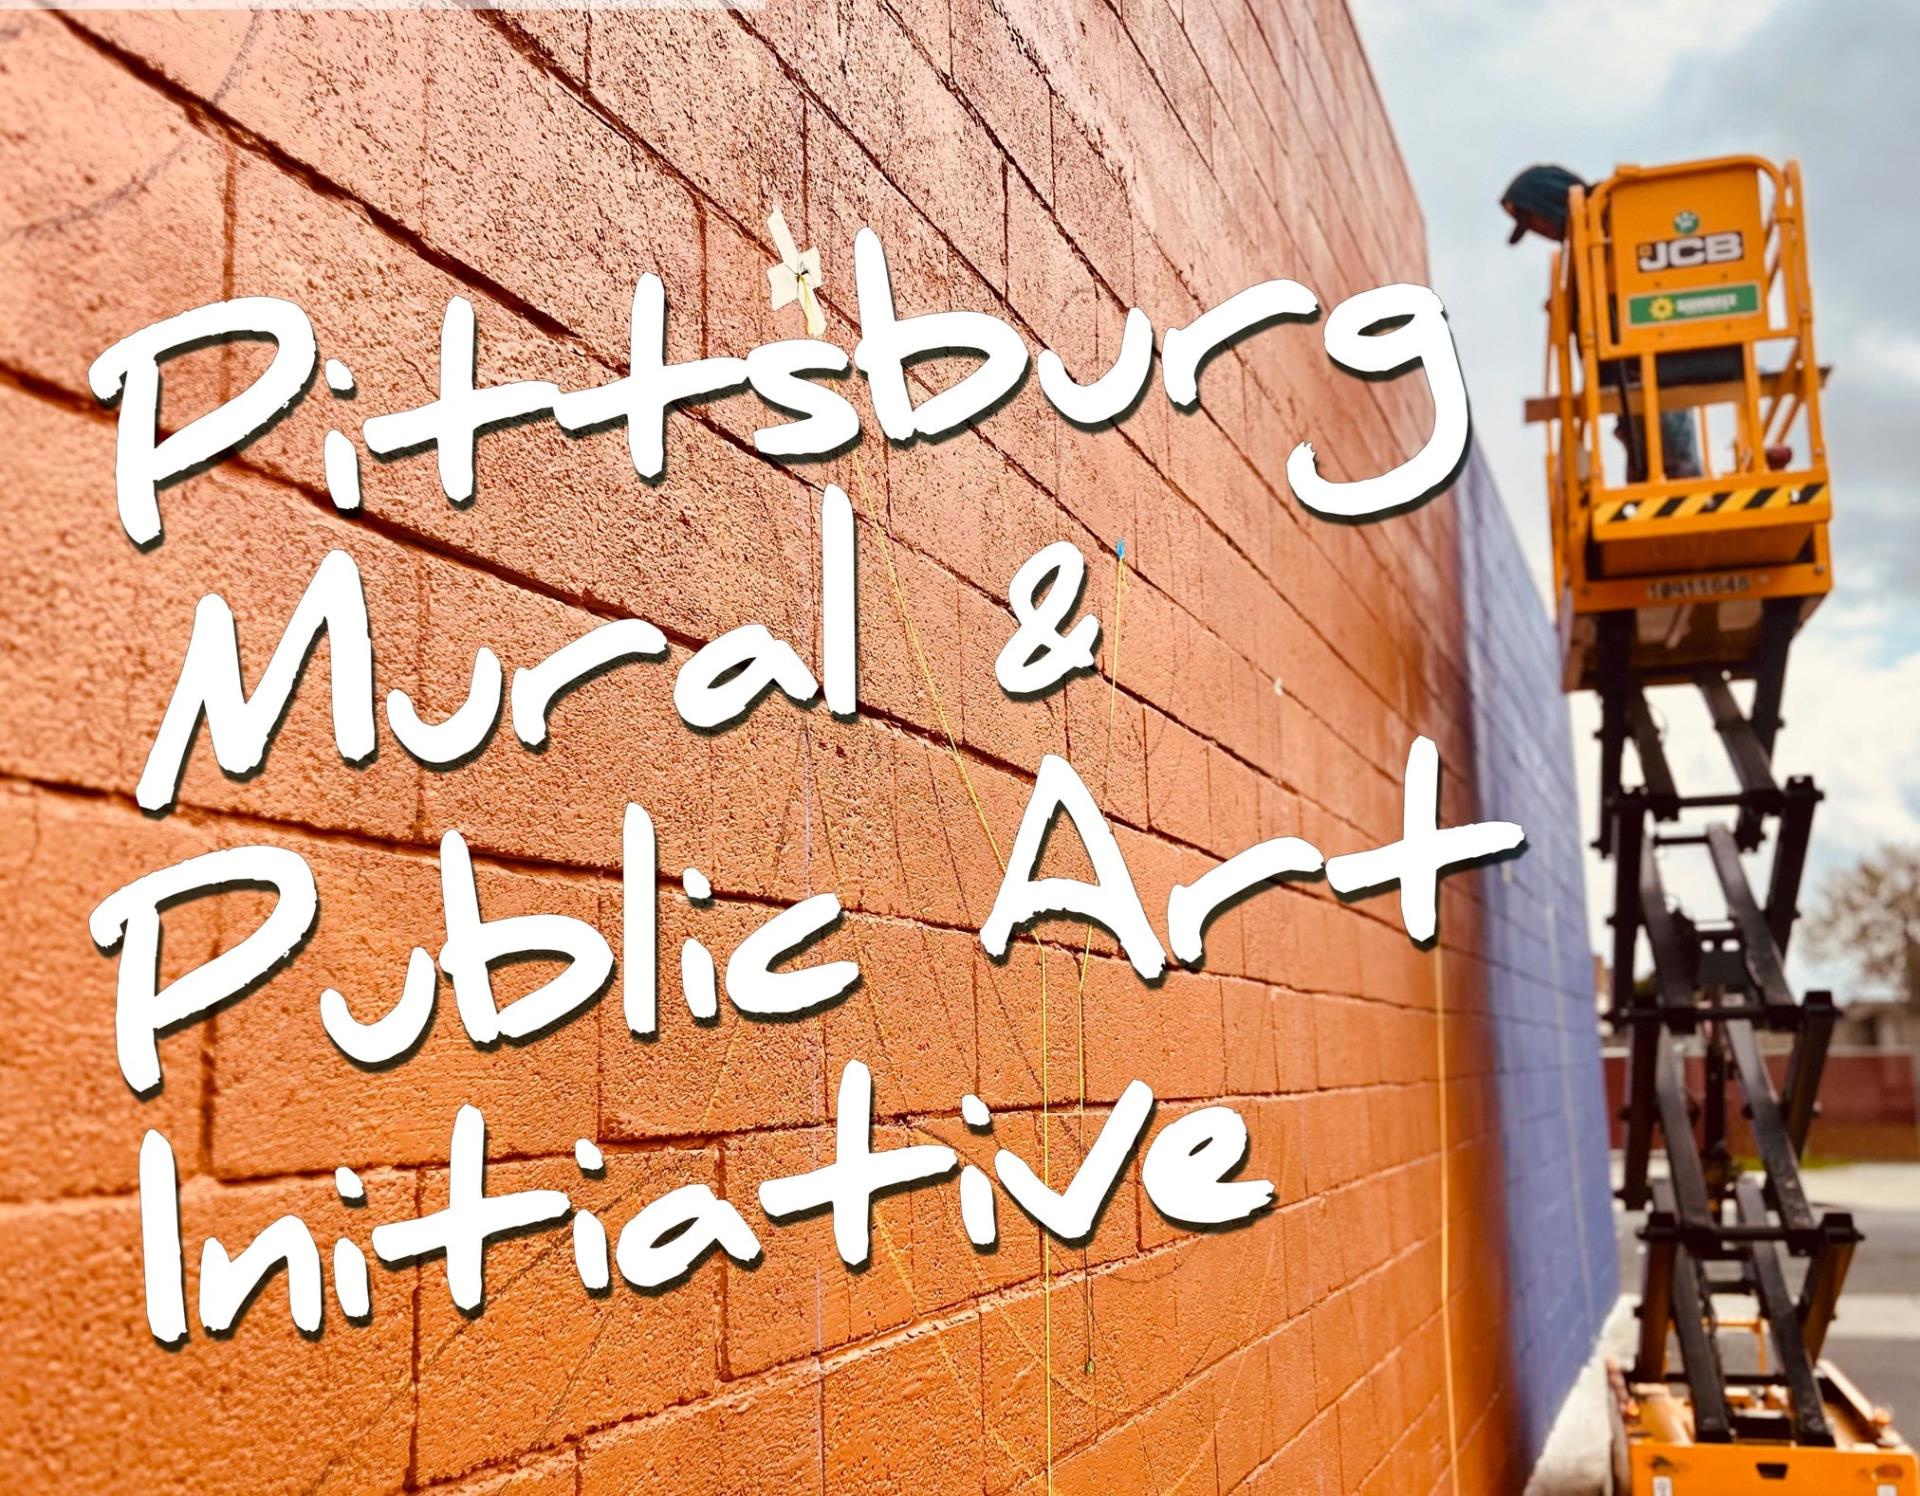 Pittsburg Launches Mural and Public Art Initiative